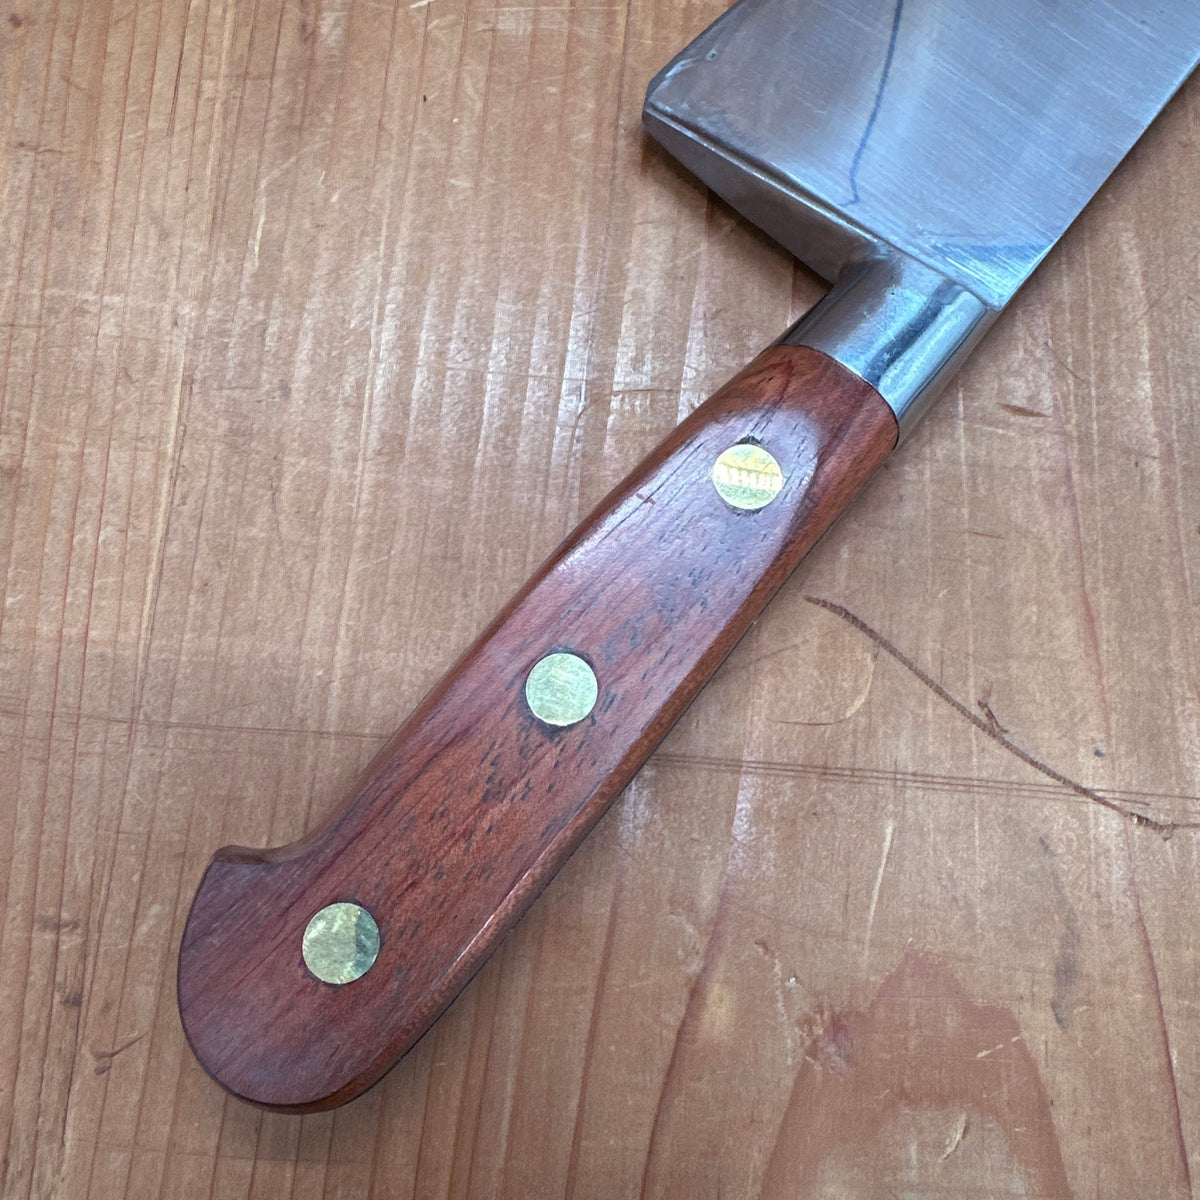 Any tips on restoring and sharpening this old fillet knife? : r/chefknives